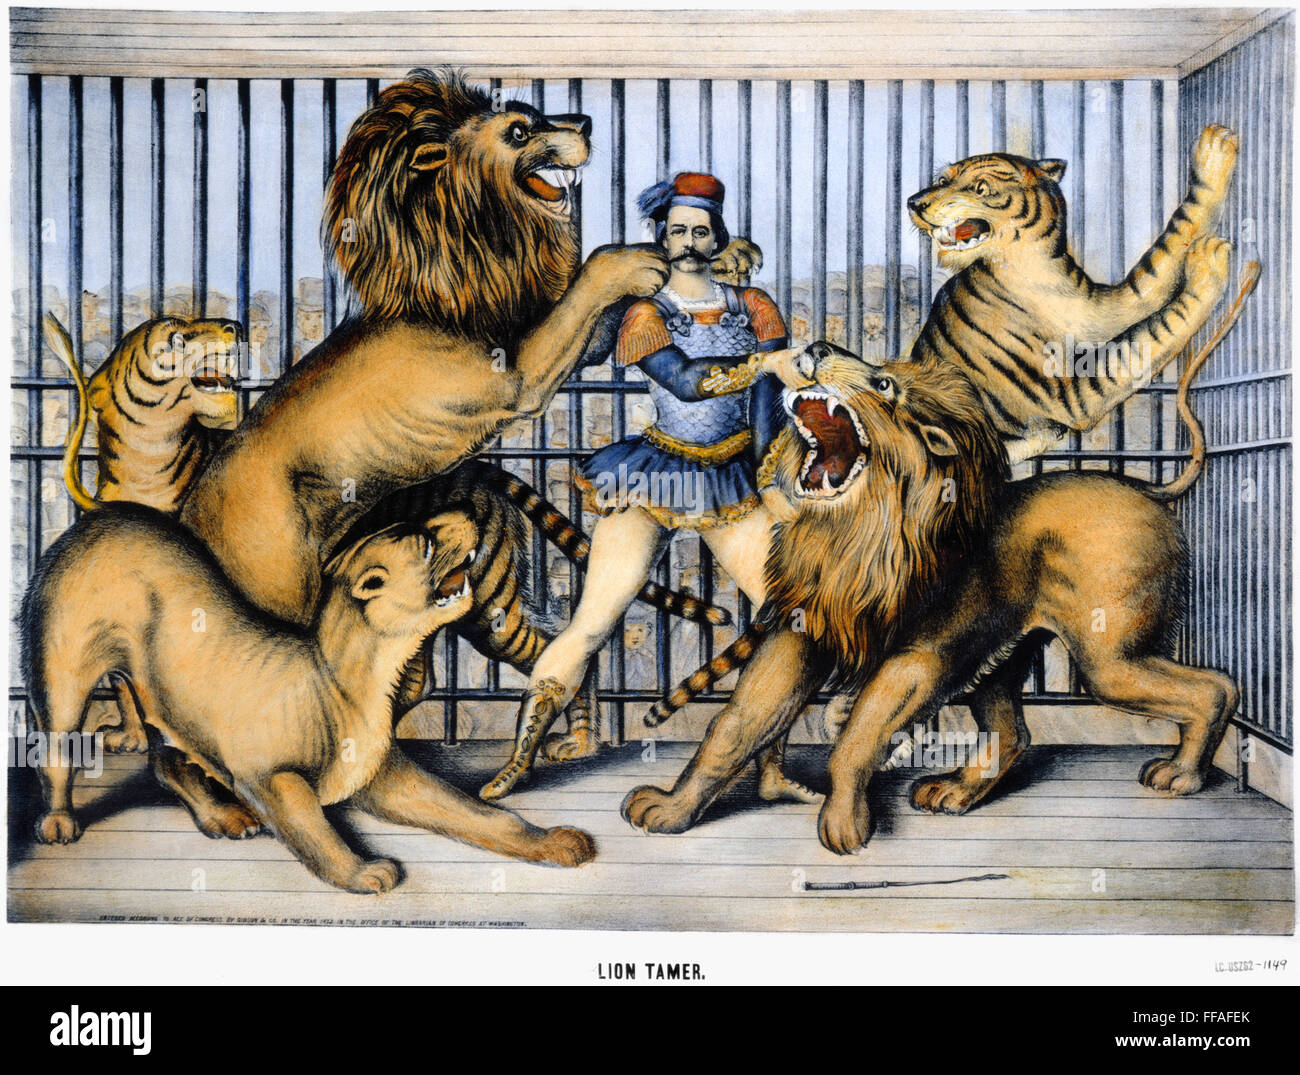 LION TAMER, 1873./nA fearless lion tamer. Lithograph, American, 1873. Stock Photo